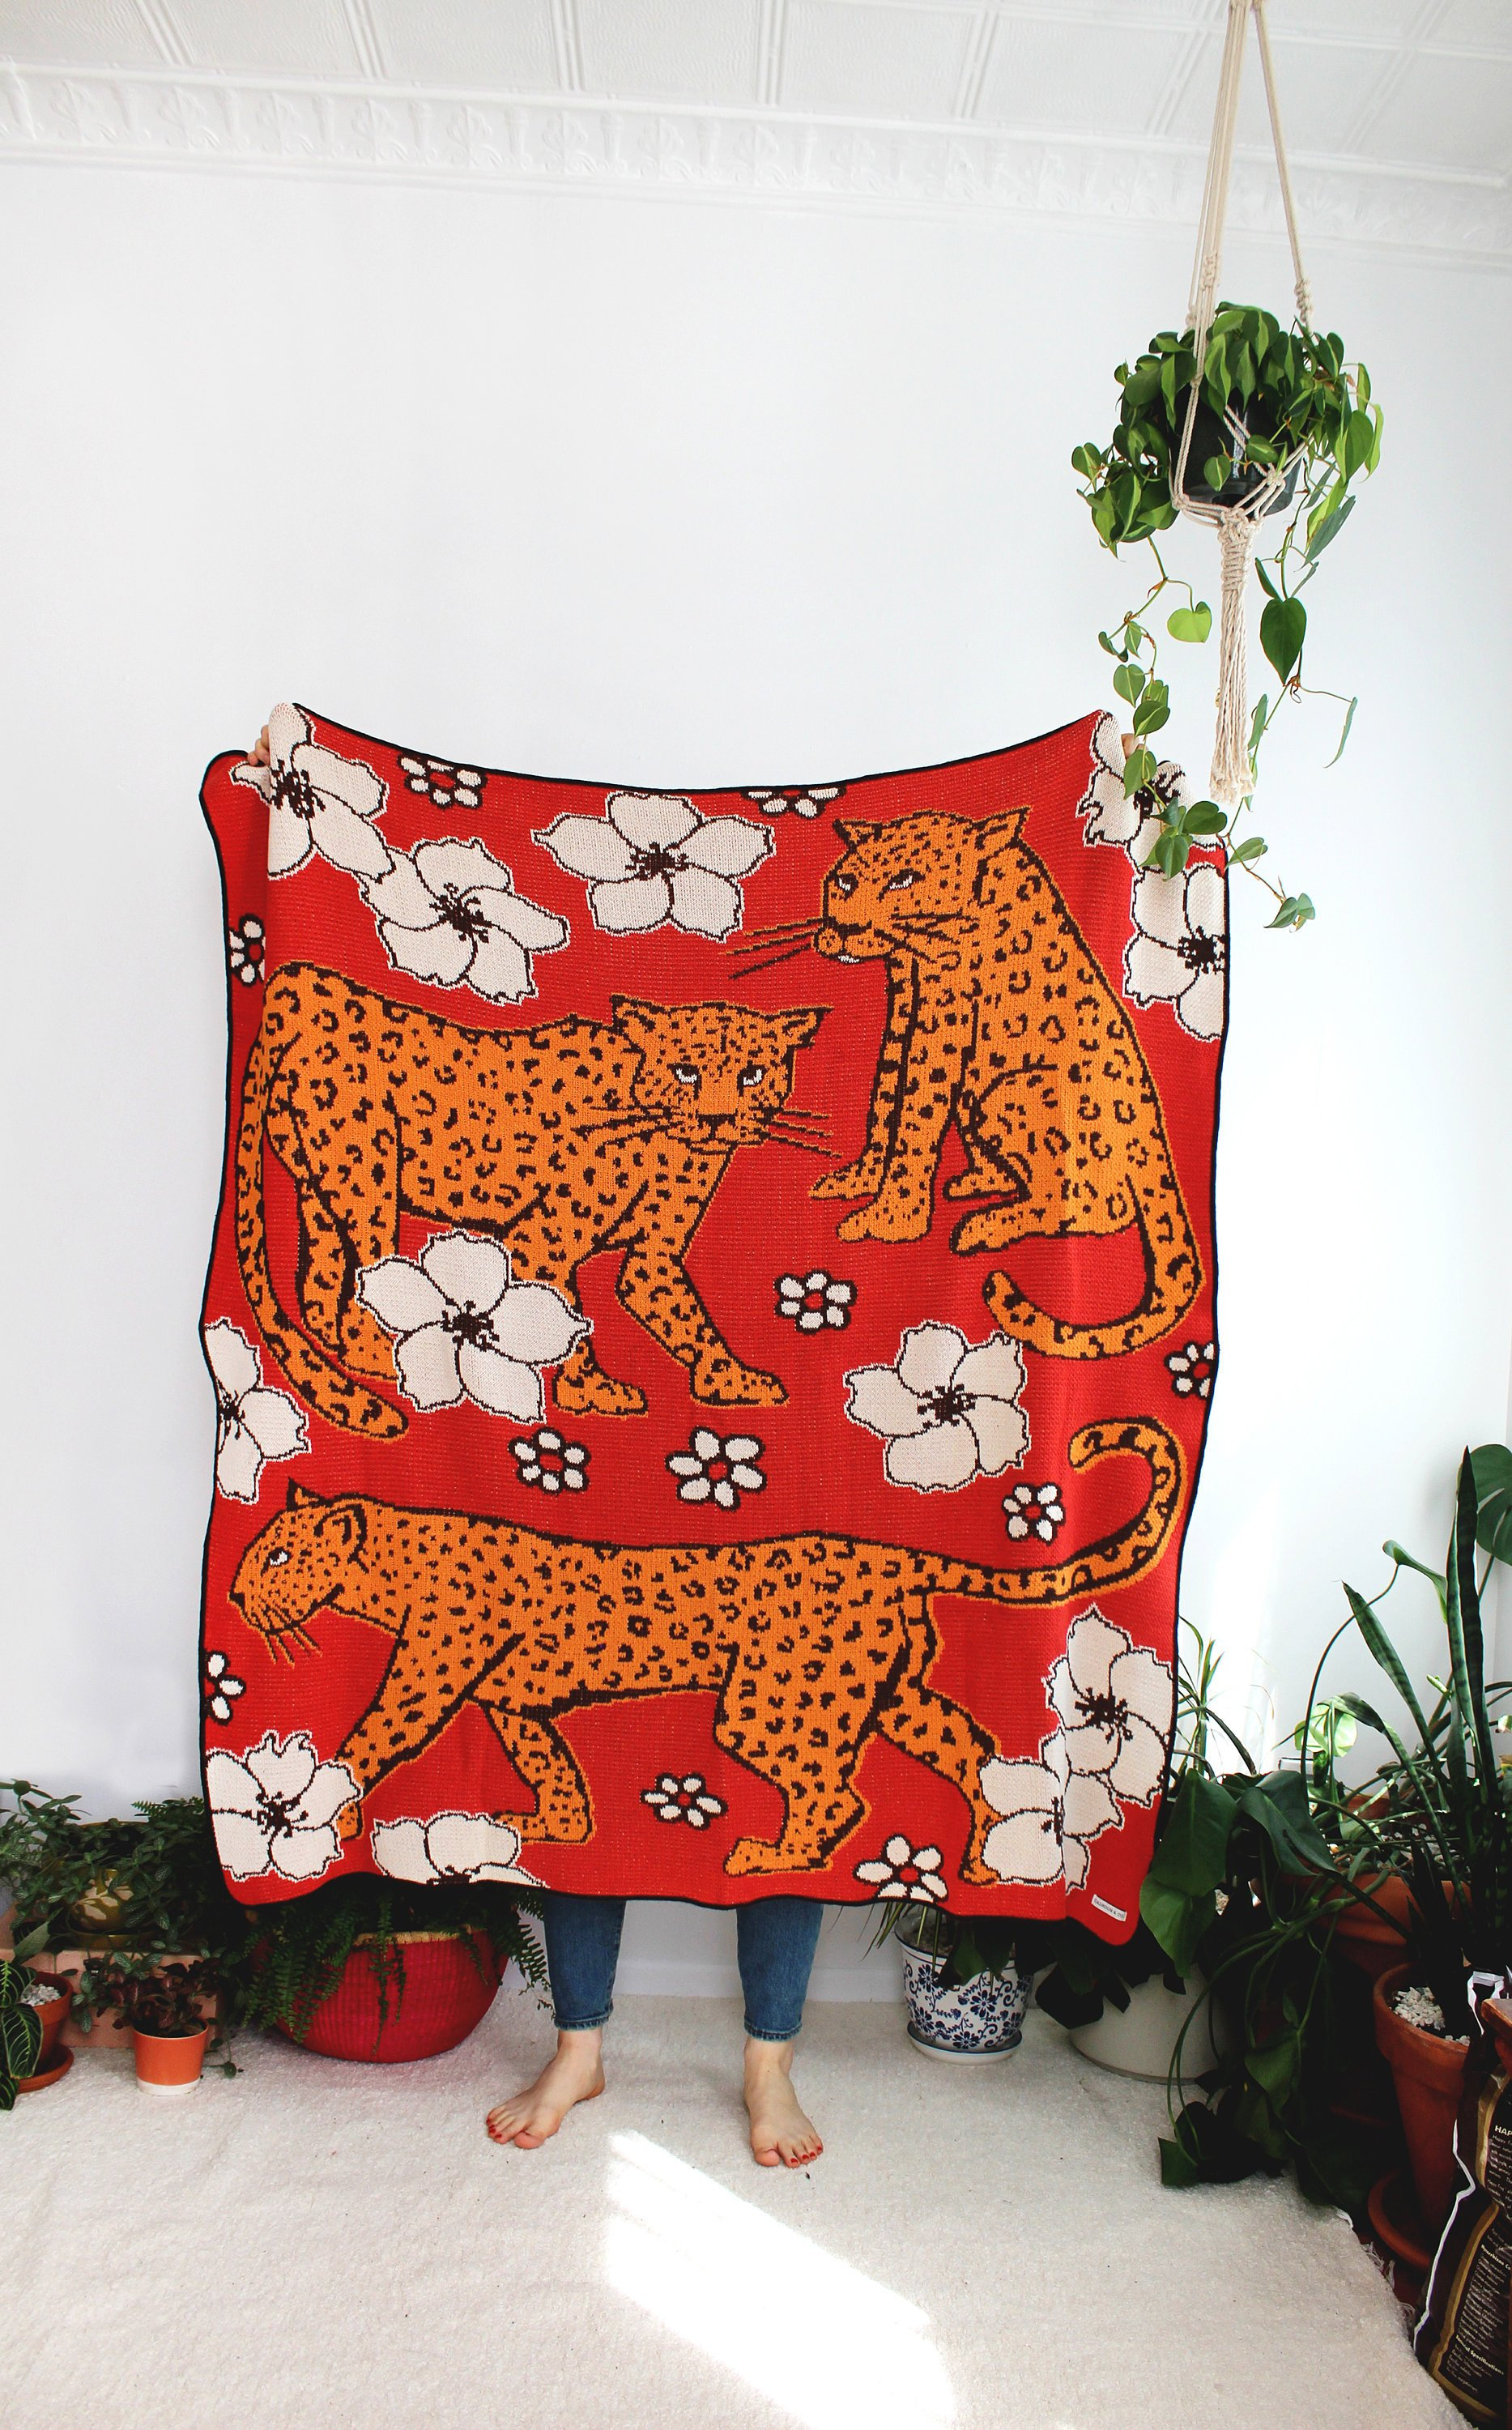 A blanket with leopards in a flower patch printed on it.